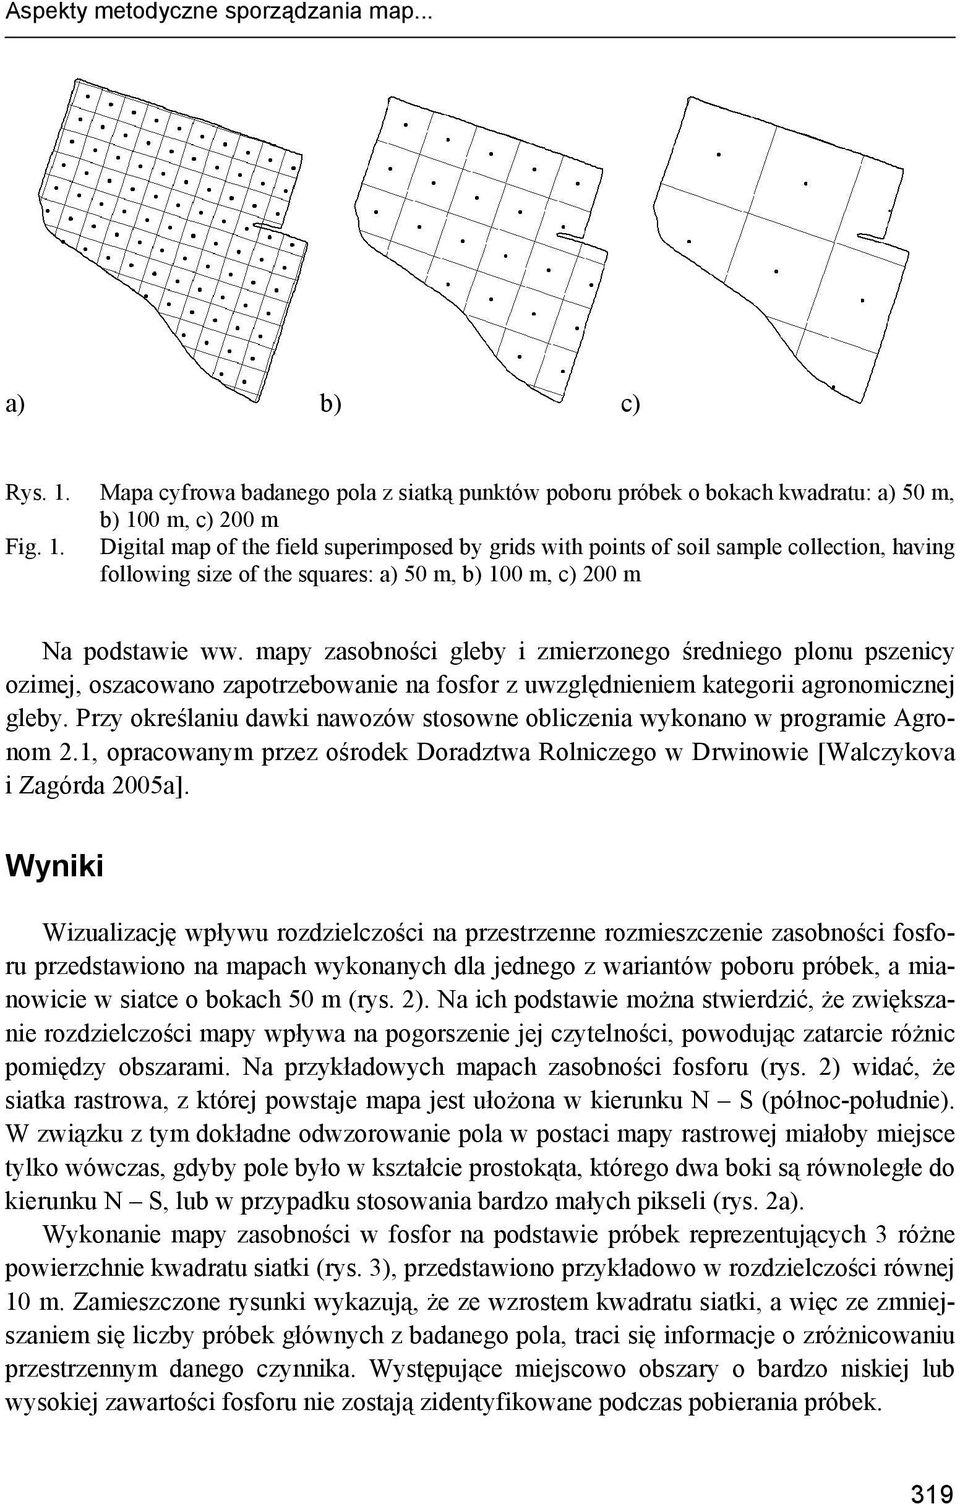 0 m, c) 200 m Fig. 1. Digital map of the field superimposed by grids with points of soil sample collection, having following size of the squares: a) 50 m, b) 100 m, c) 200 m Na podstawie ww.